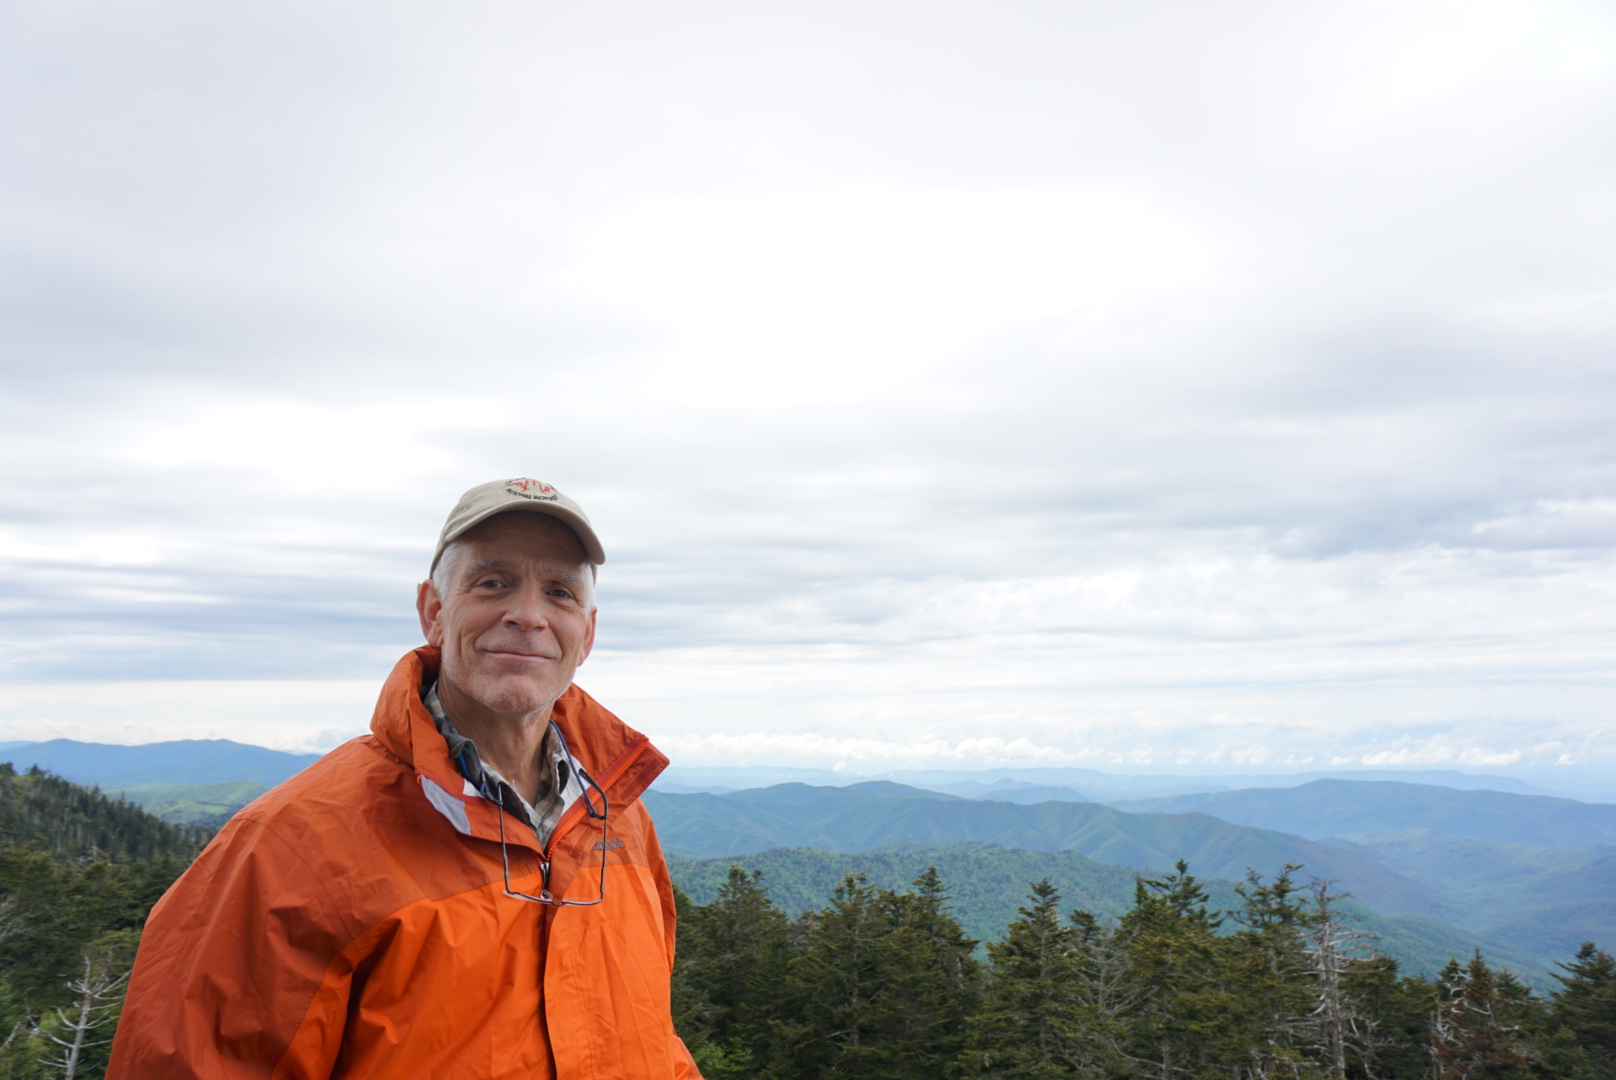 Ken stands in front of a scenic overlook in the Smoky Mountains.